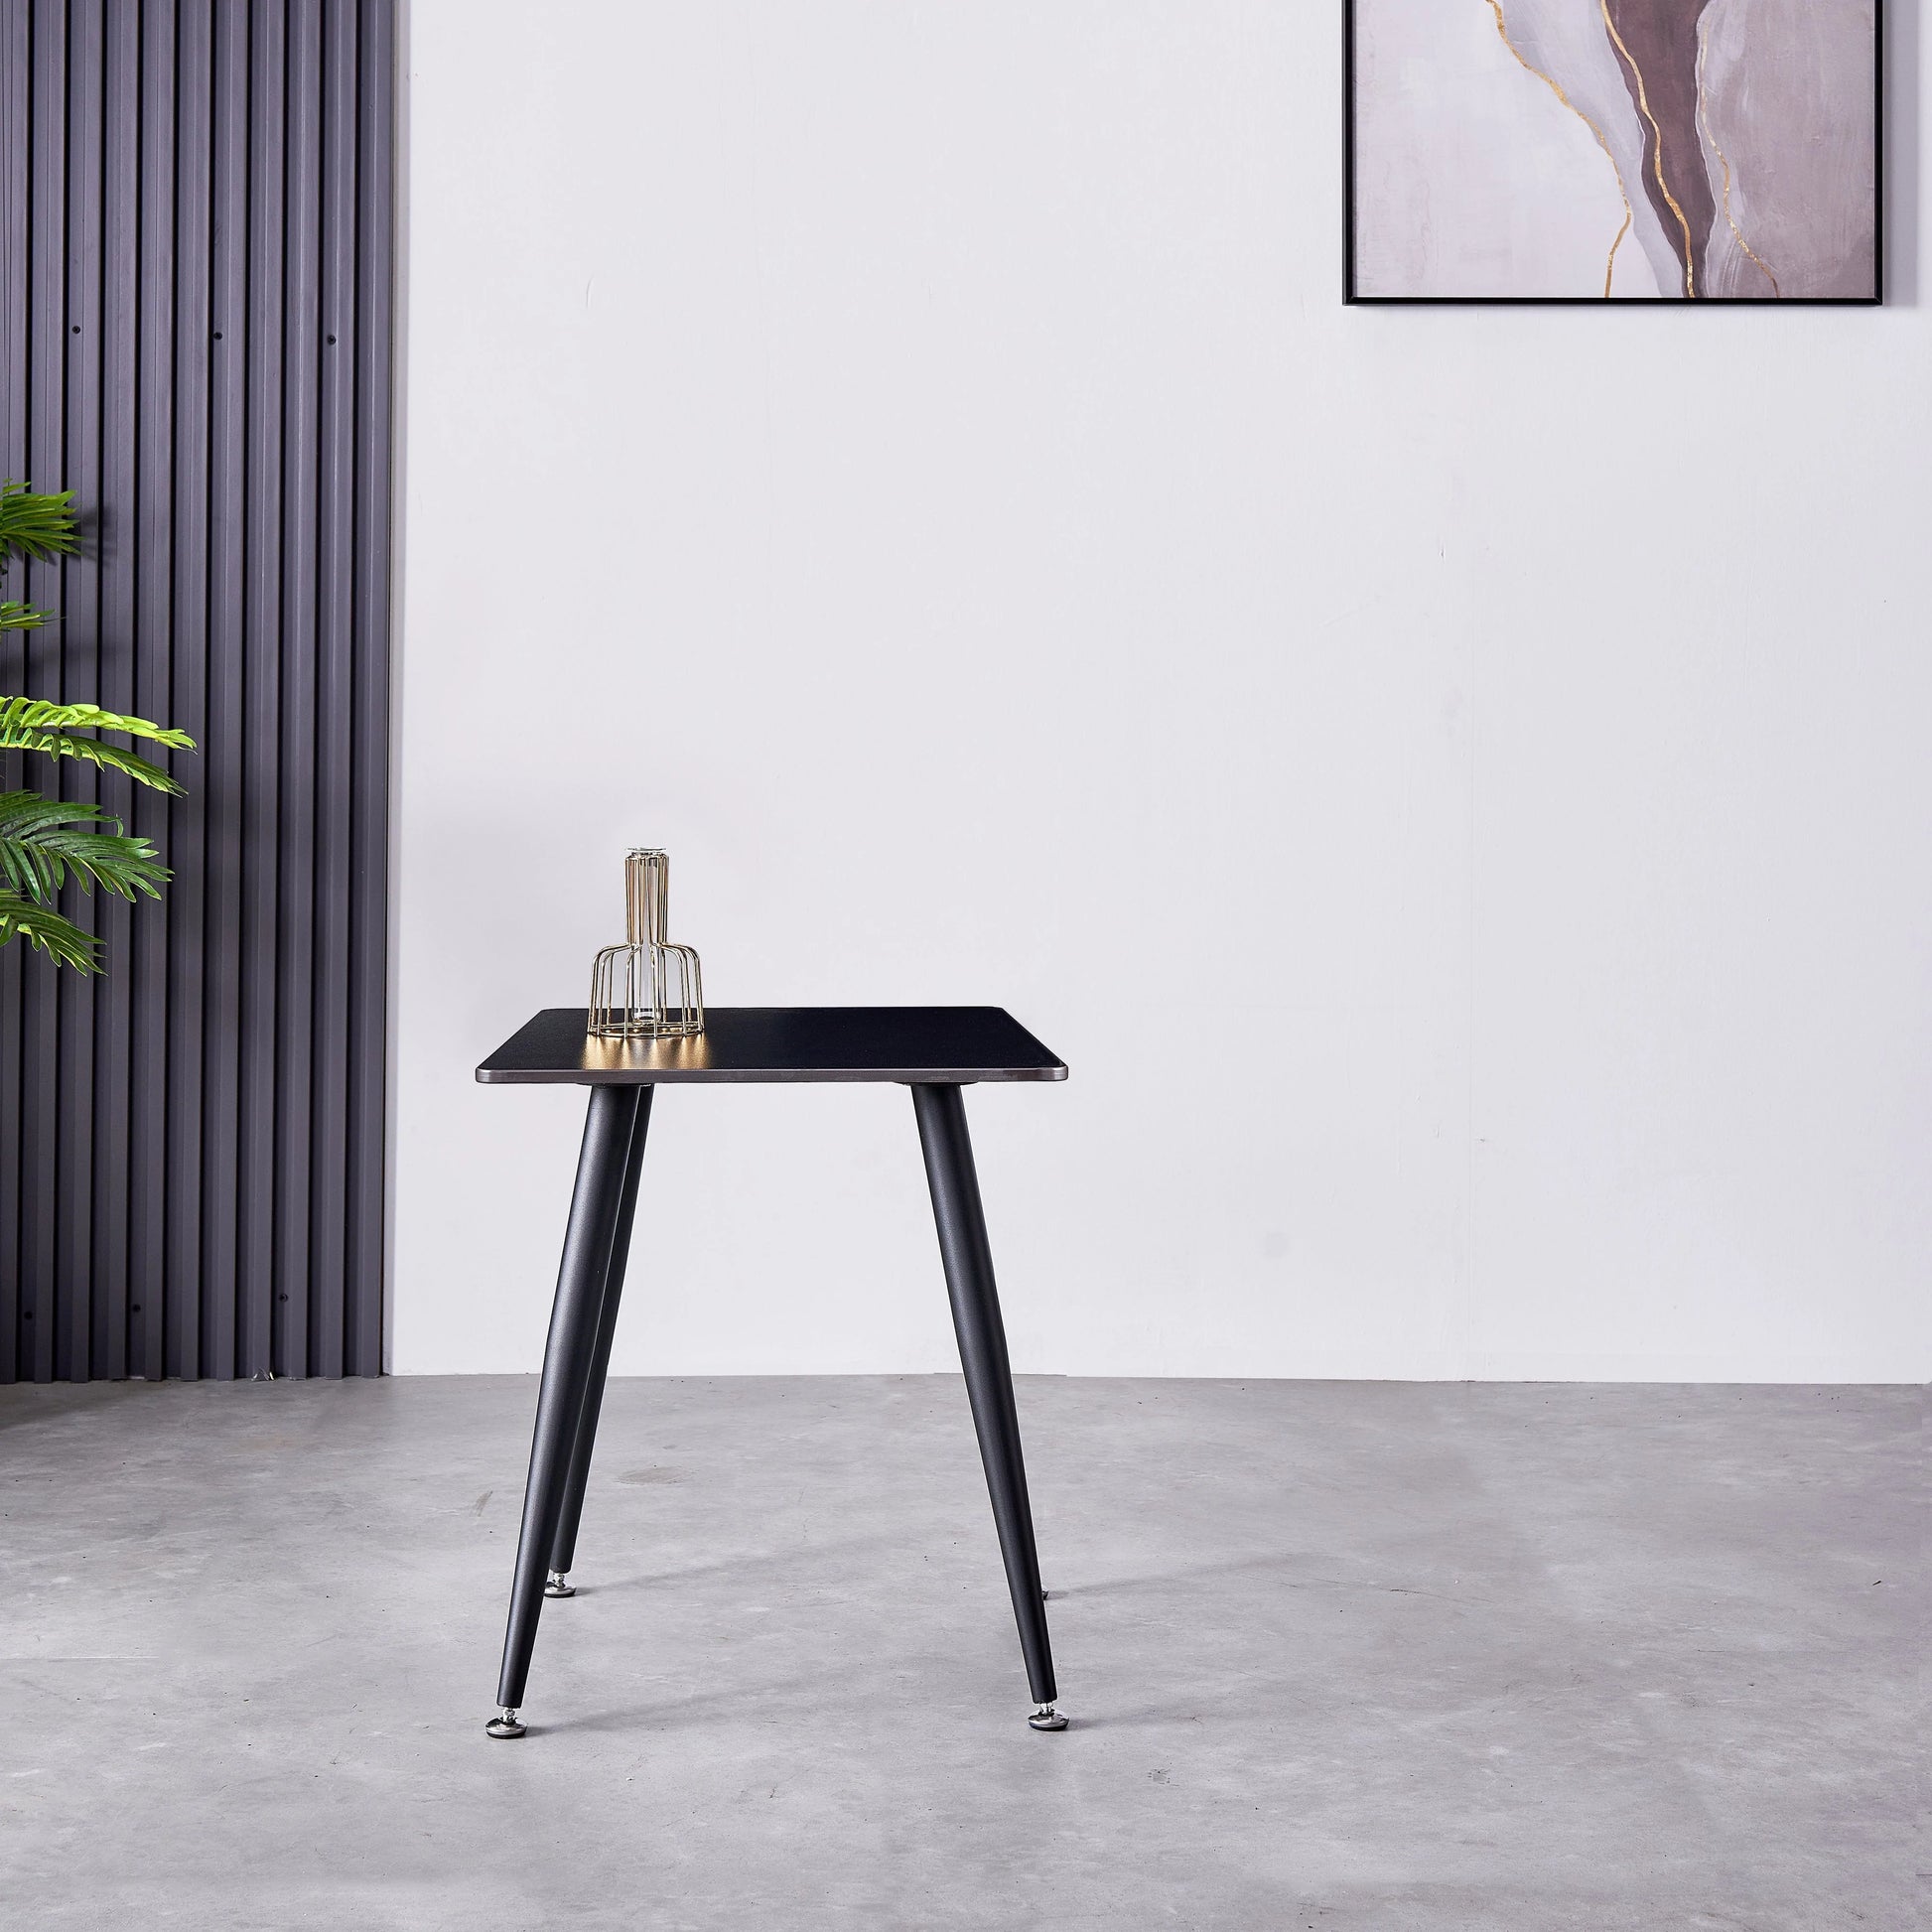 Mendy Black Sintered Stone End Table with Metal Legs by Criterion™ Furniture > Tables > Accent Tables > End Tables HLS